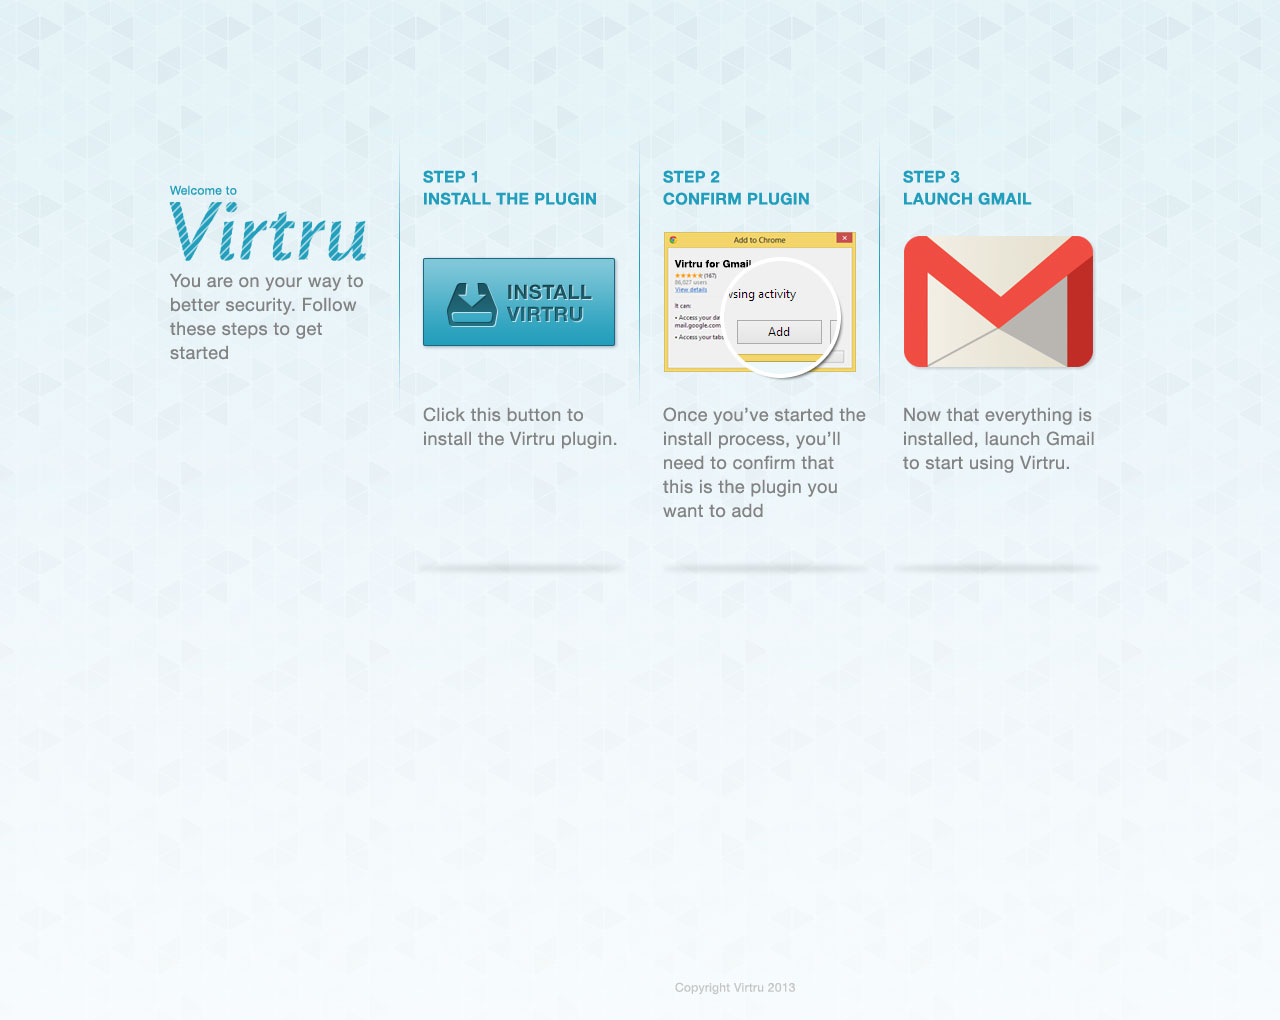 Initially, the landing page to install Virtru was a wall of text. I made it more consumable by adding in images and reducing the text as much as possible.